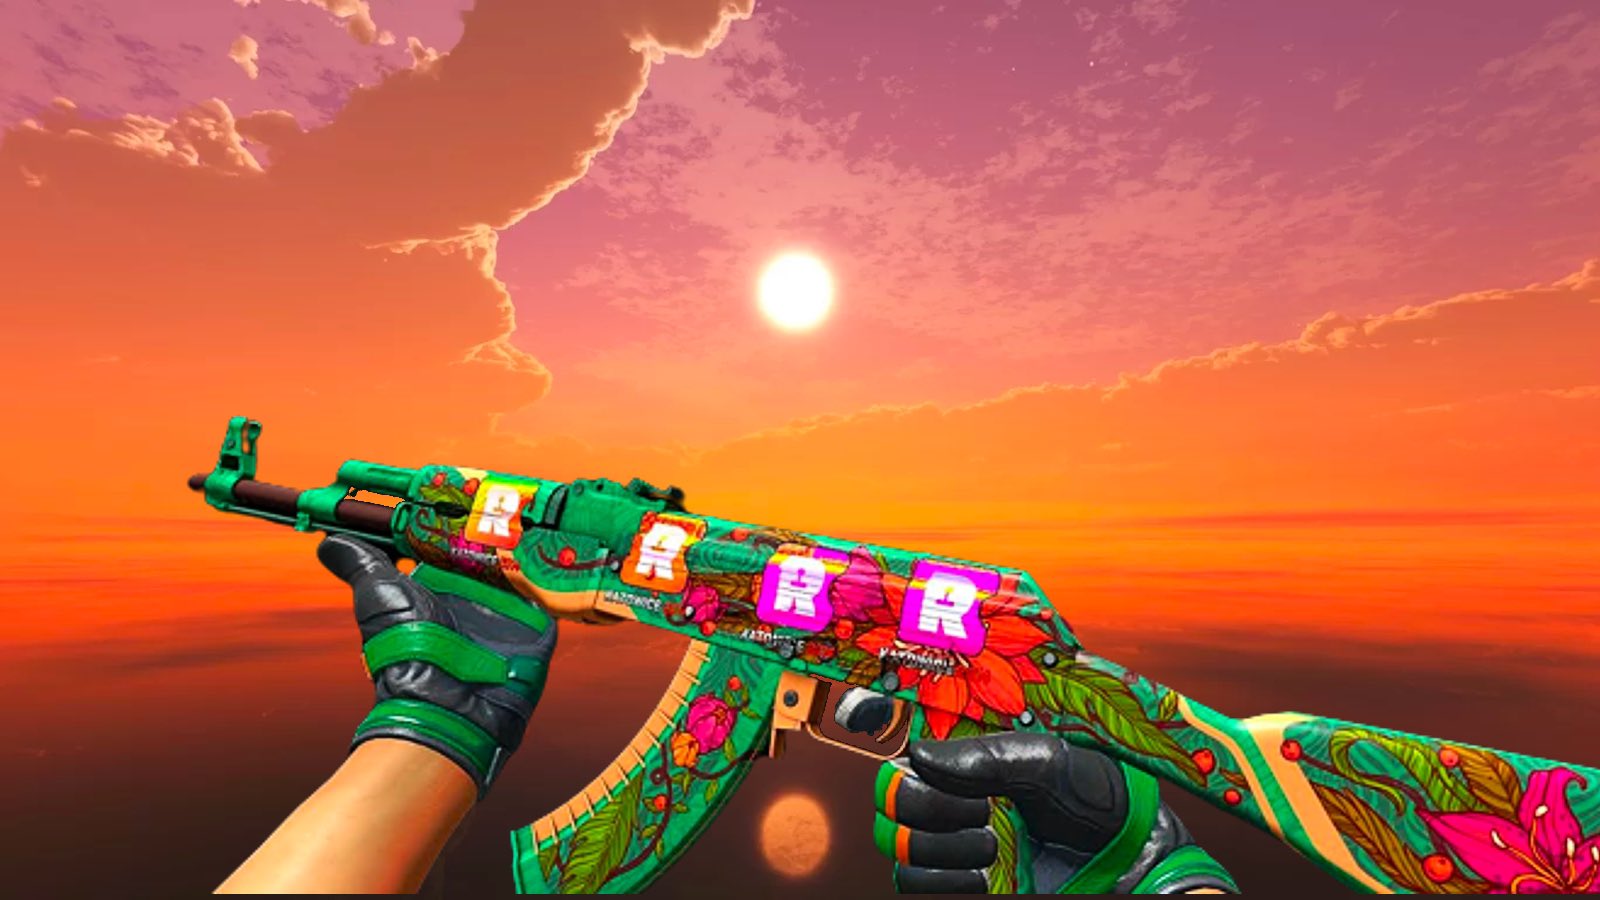  Someone dropped over $150K on a CS:GO gun skin and I think it's time for the revolution 